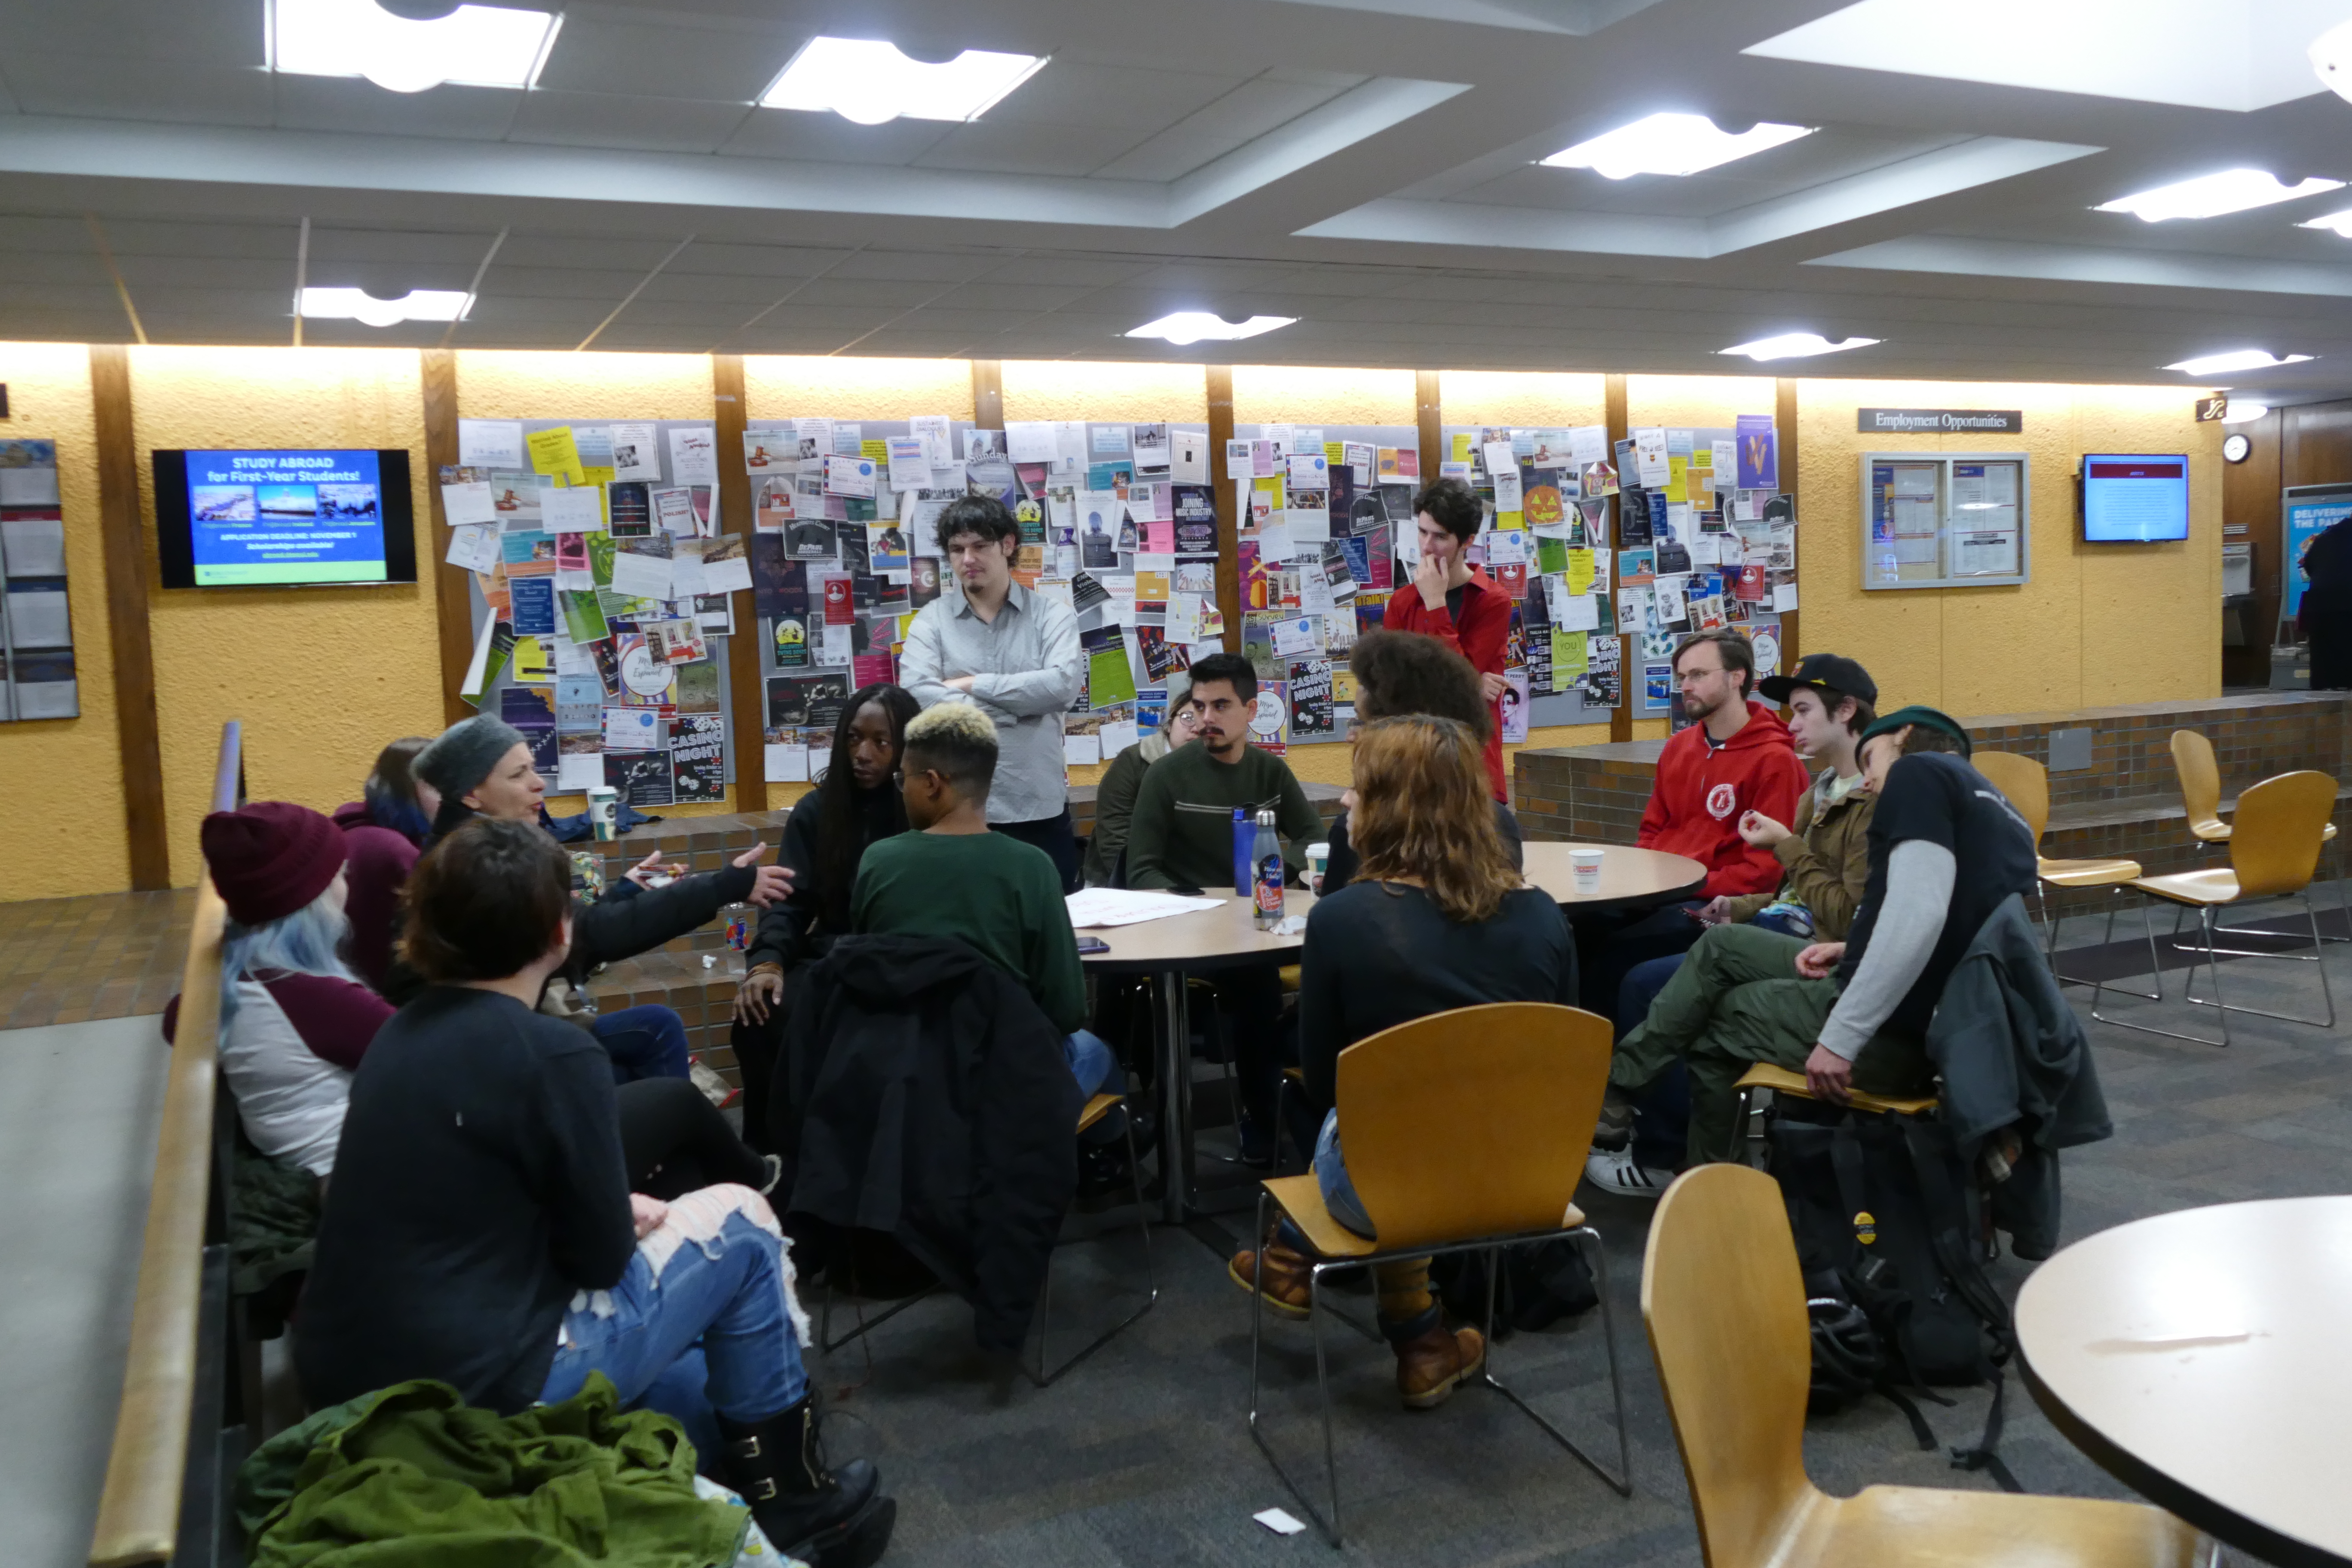 The DePaul Socialists engage in a discussion after the protest for Guardian workers Tuesday, Oct. 24. Photo: Marissa Nelson, 14 East.